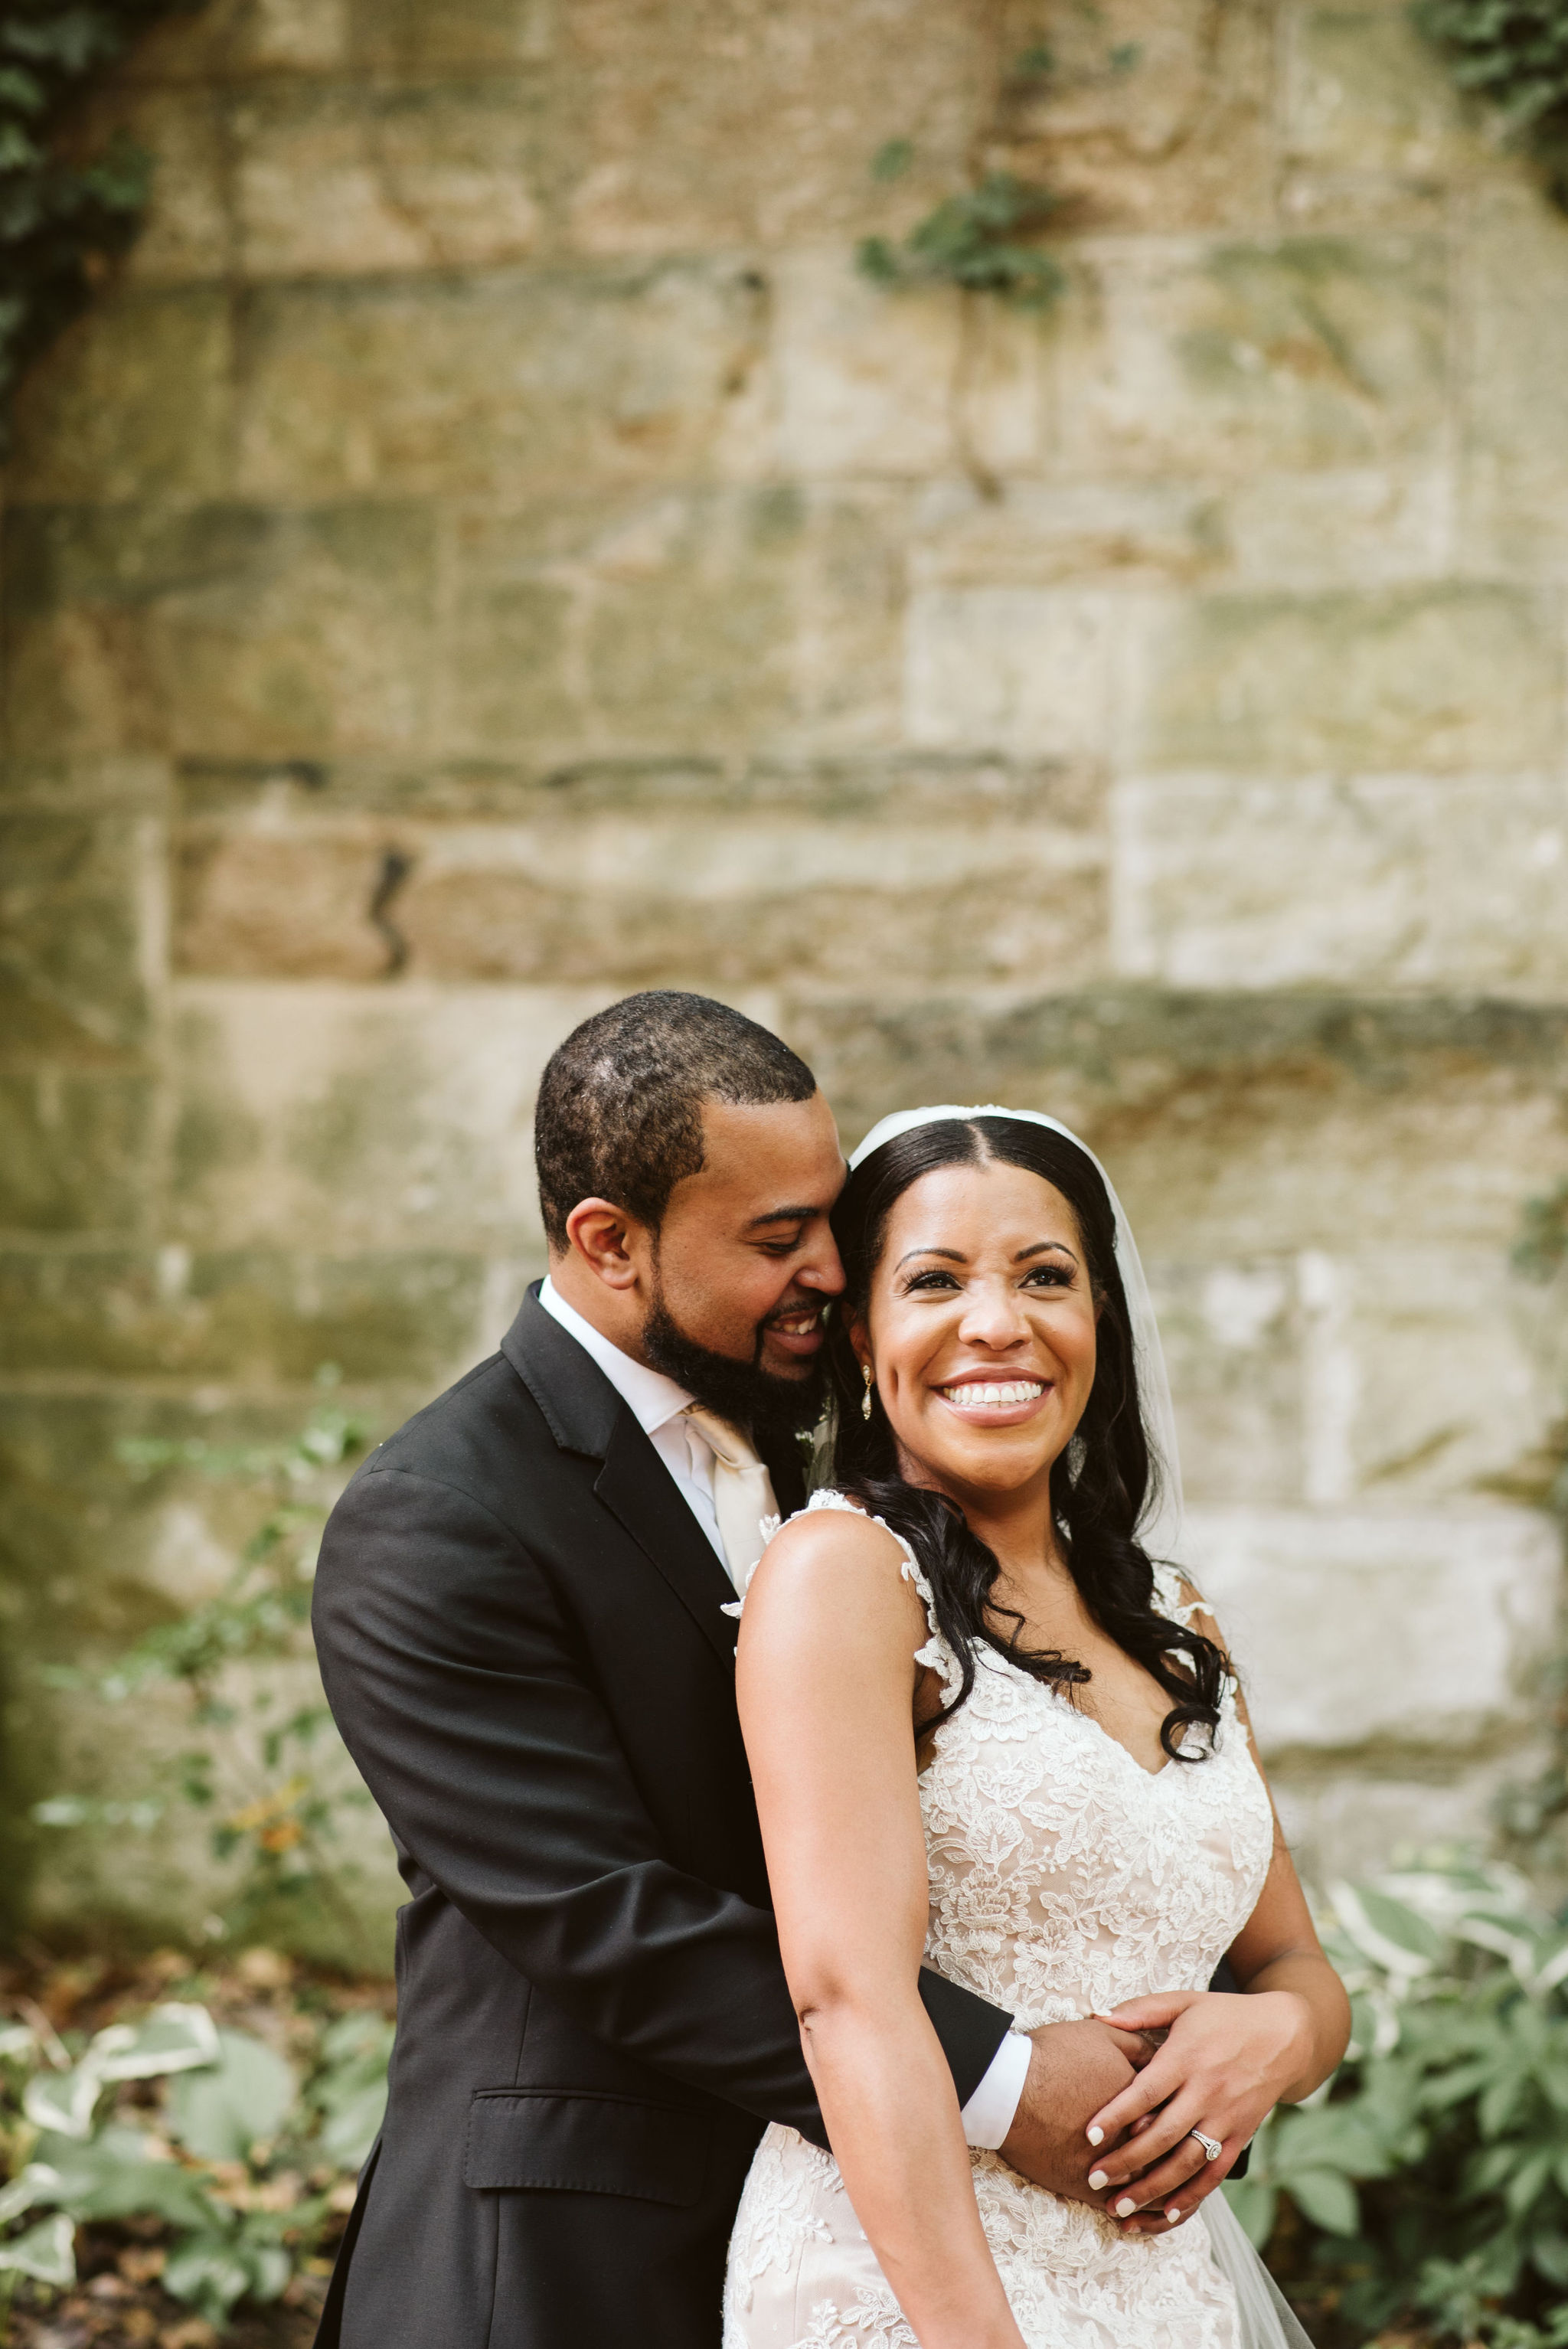  Baltimore, Maryland Wedding Photographer, Mount Vernon, Chase Court, Classic, Outdoor Ceremony, Garden, Romantic, Portrait of Bride and Groom Smiling and Hugging in Front of Ivy Wall 